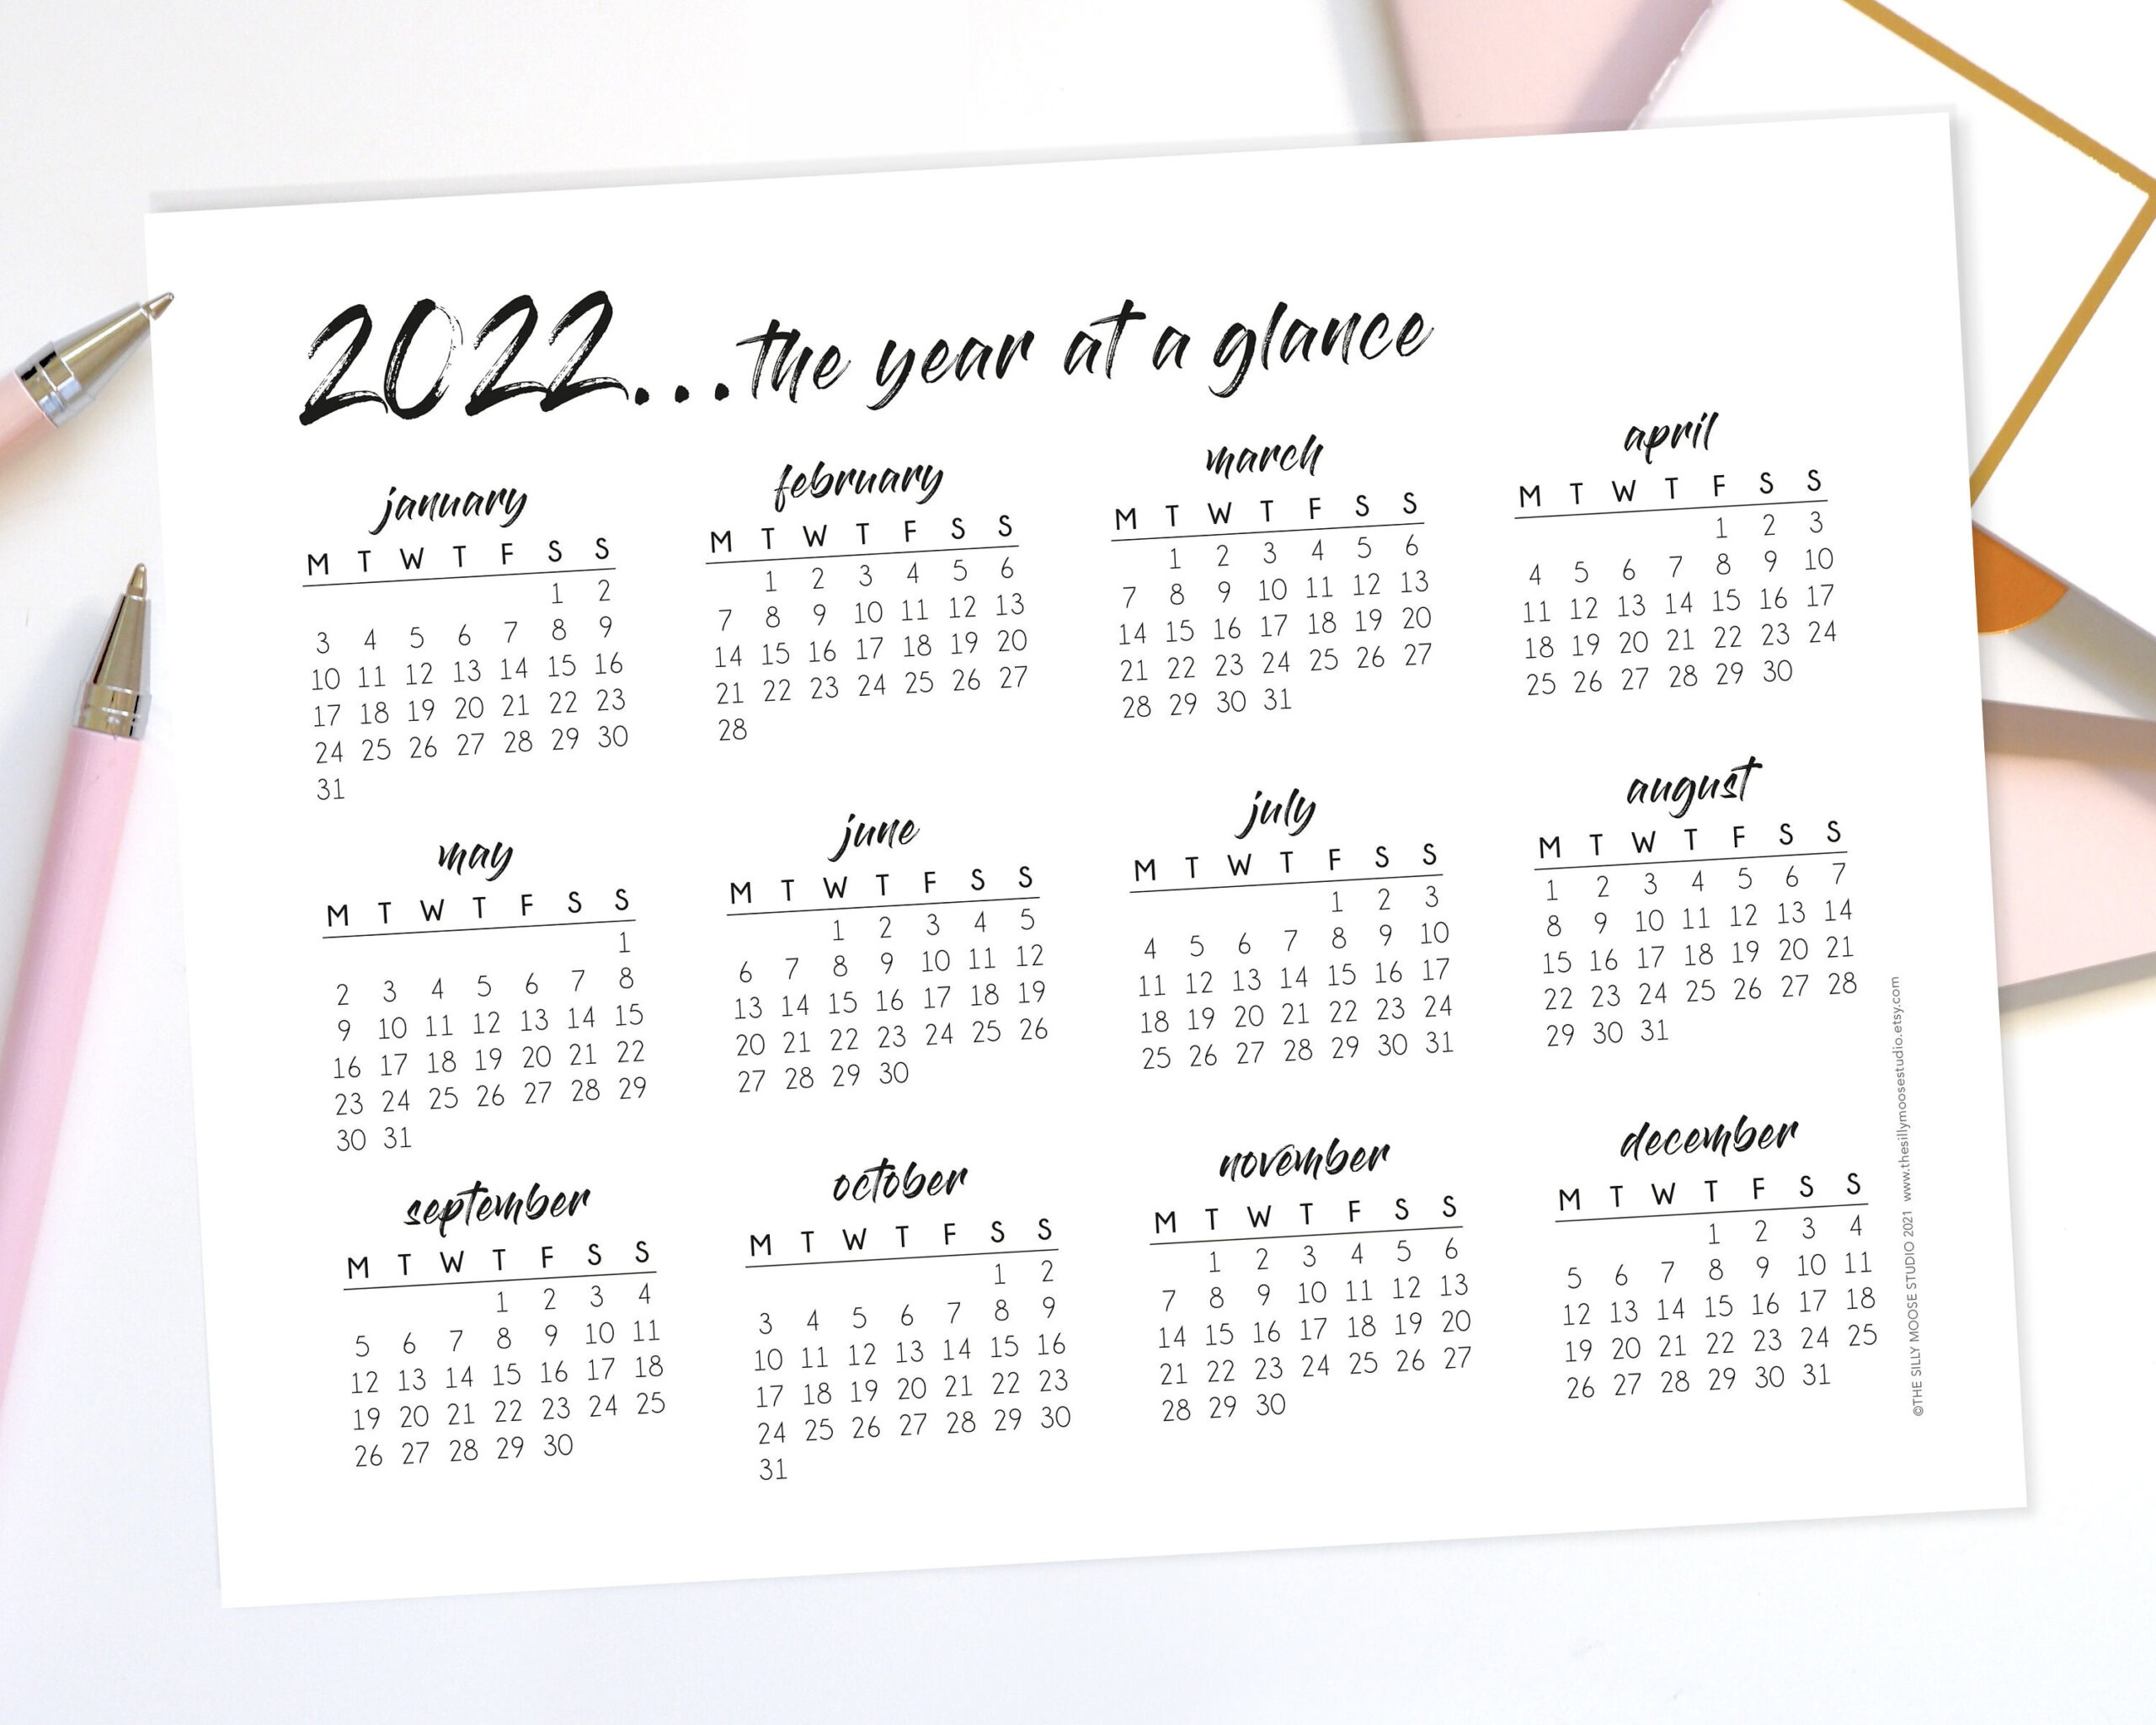 2022 Yearly Calendar Printable Monday Start Landscape Year | Etsy pertaining to Year At A Glance Calendar 2022